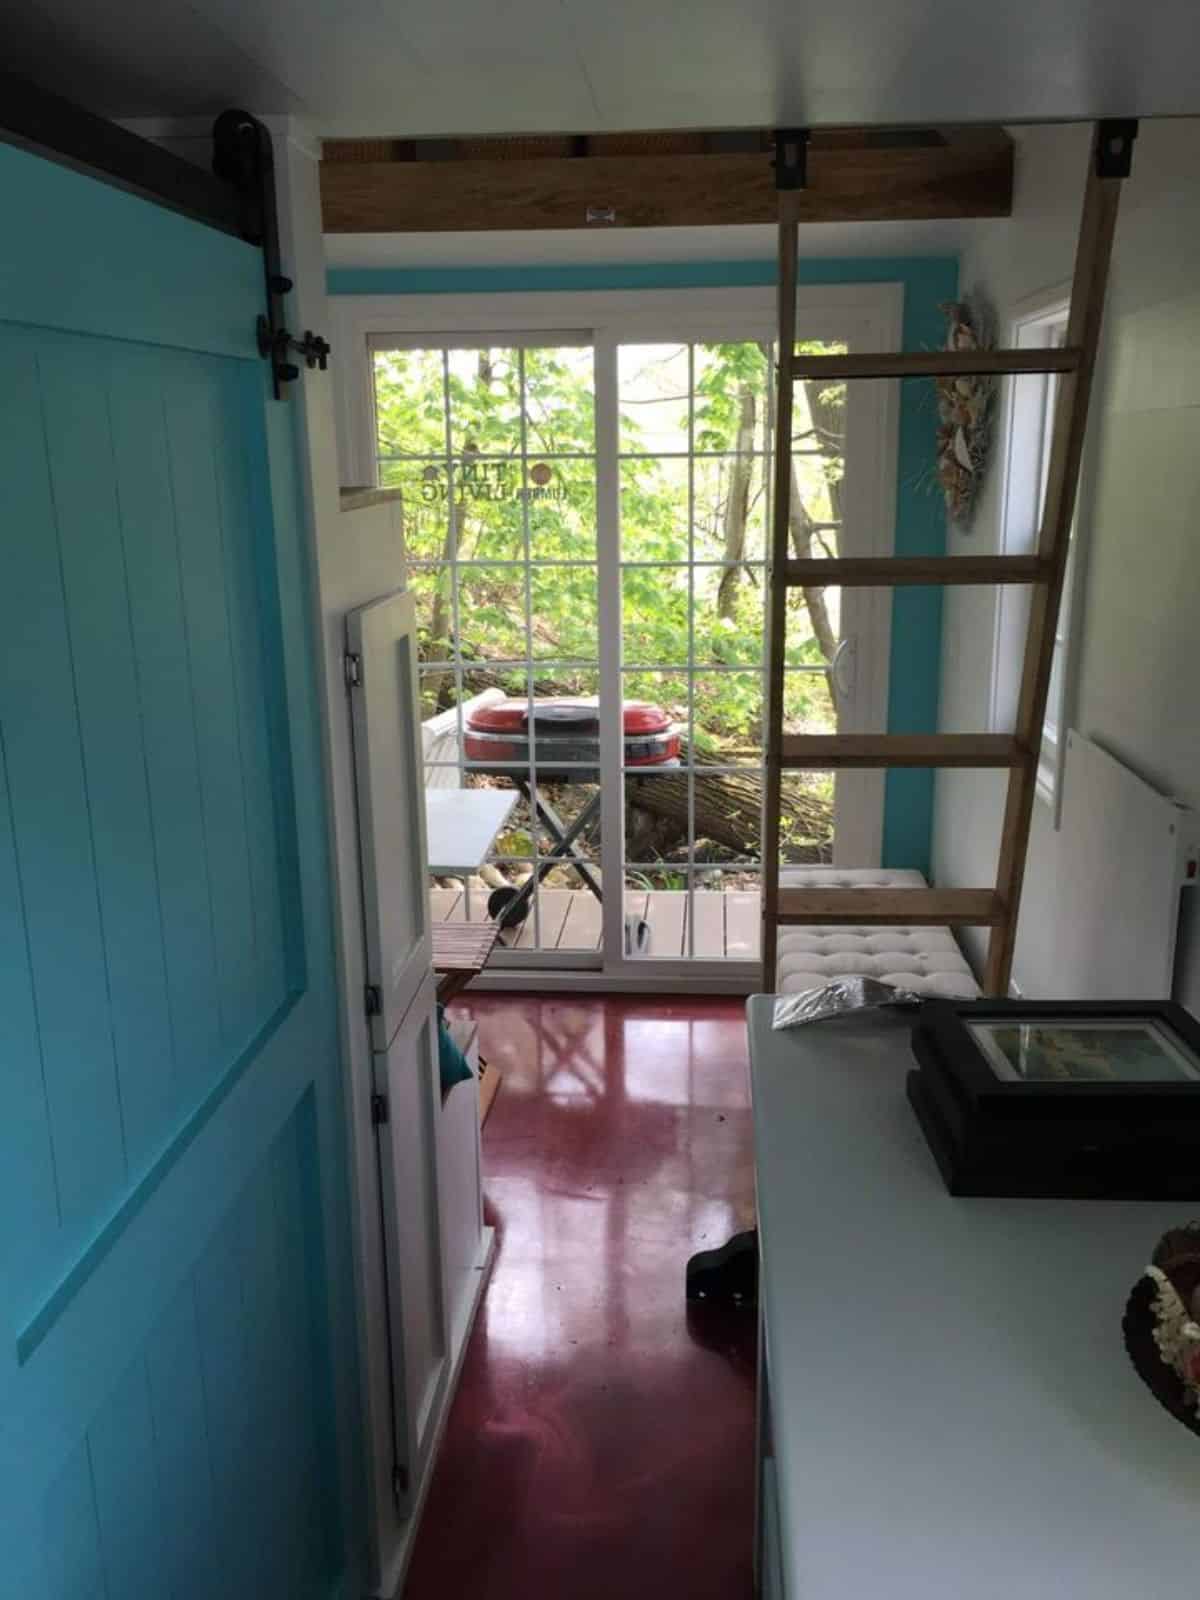 glass main entrance door of super tiny house from inside